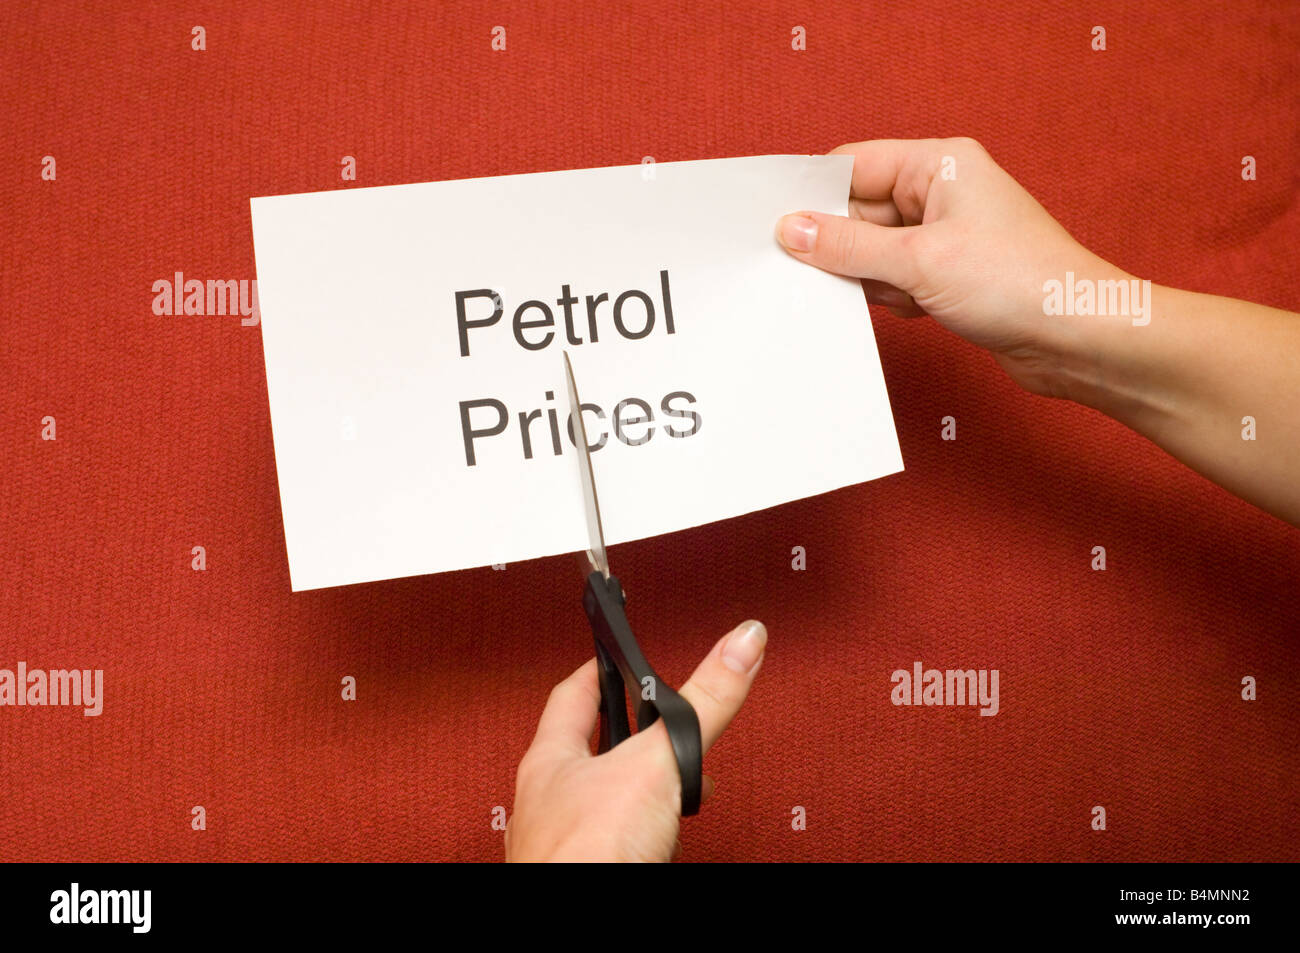 Picture of person cutting a piece of paper with 'petrol prices' written on it using a pair of scissors Stock Photo